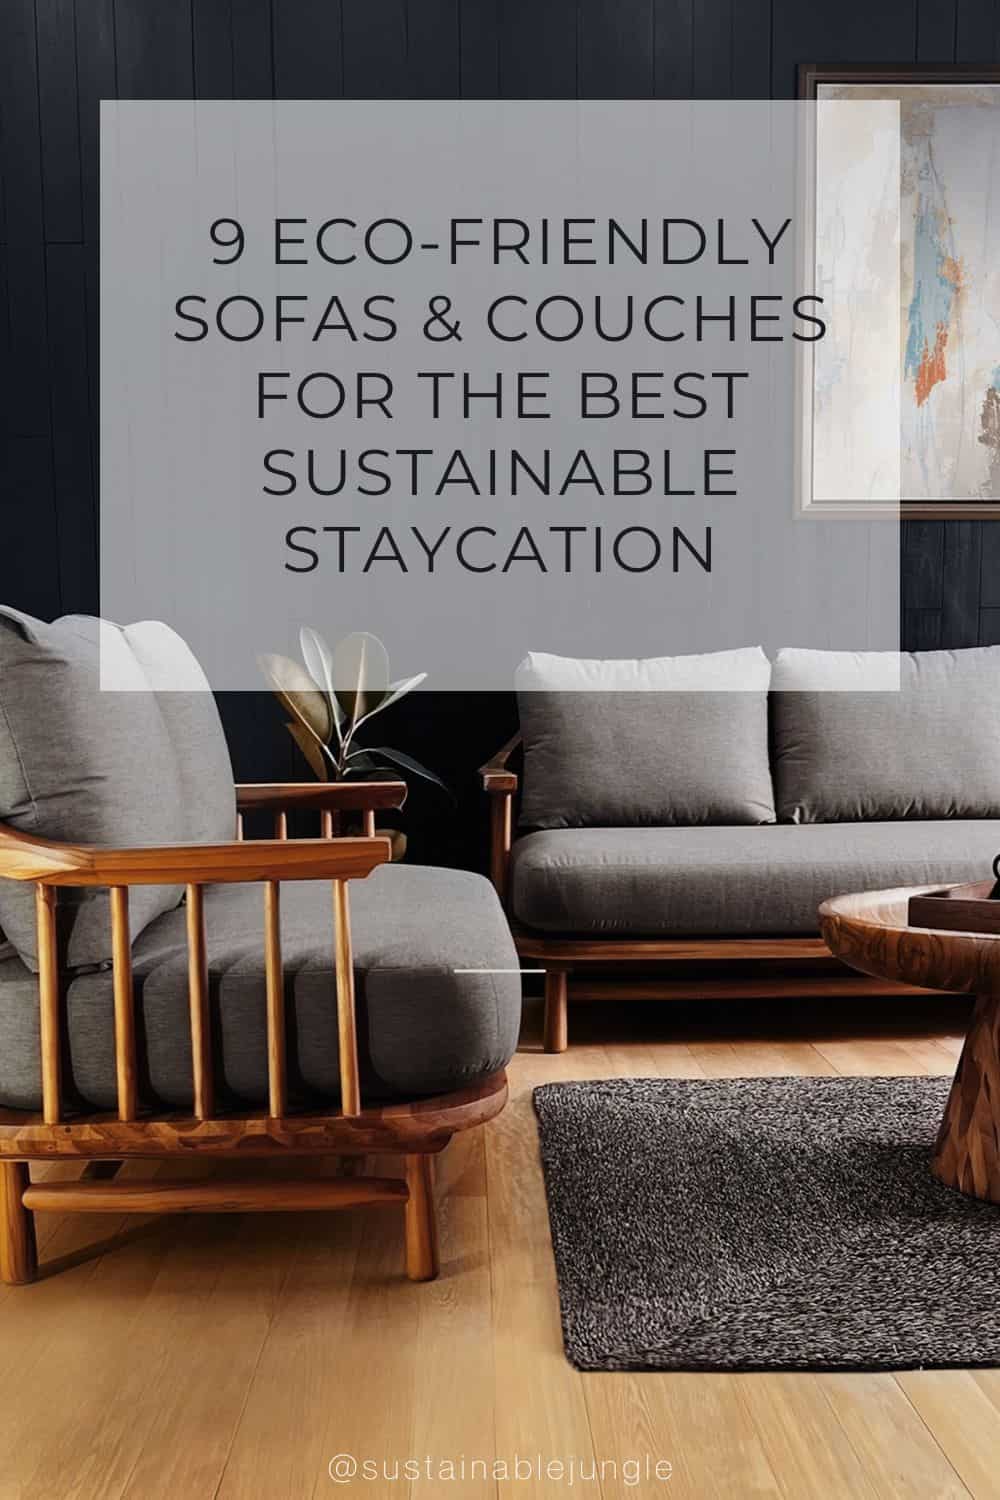 9 Eco-Friendly Sofas & Couches For The Best Sustainable Staycation Images by Massaya & Co #ecofriendlycouches #ecofriendlysofas #ecofriendlysofabed #ecofriendlysectionalcouches #sustainablecouches #sustainablesofas #sustainablejungle